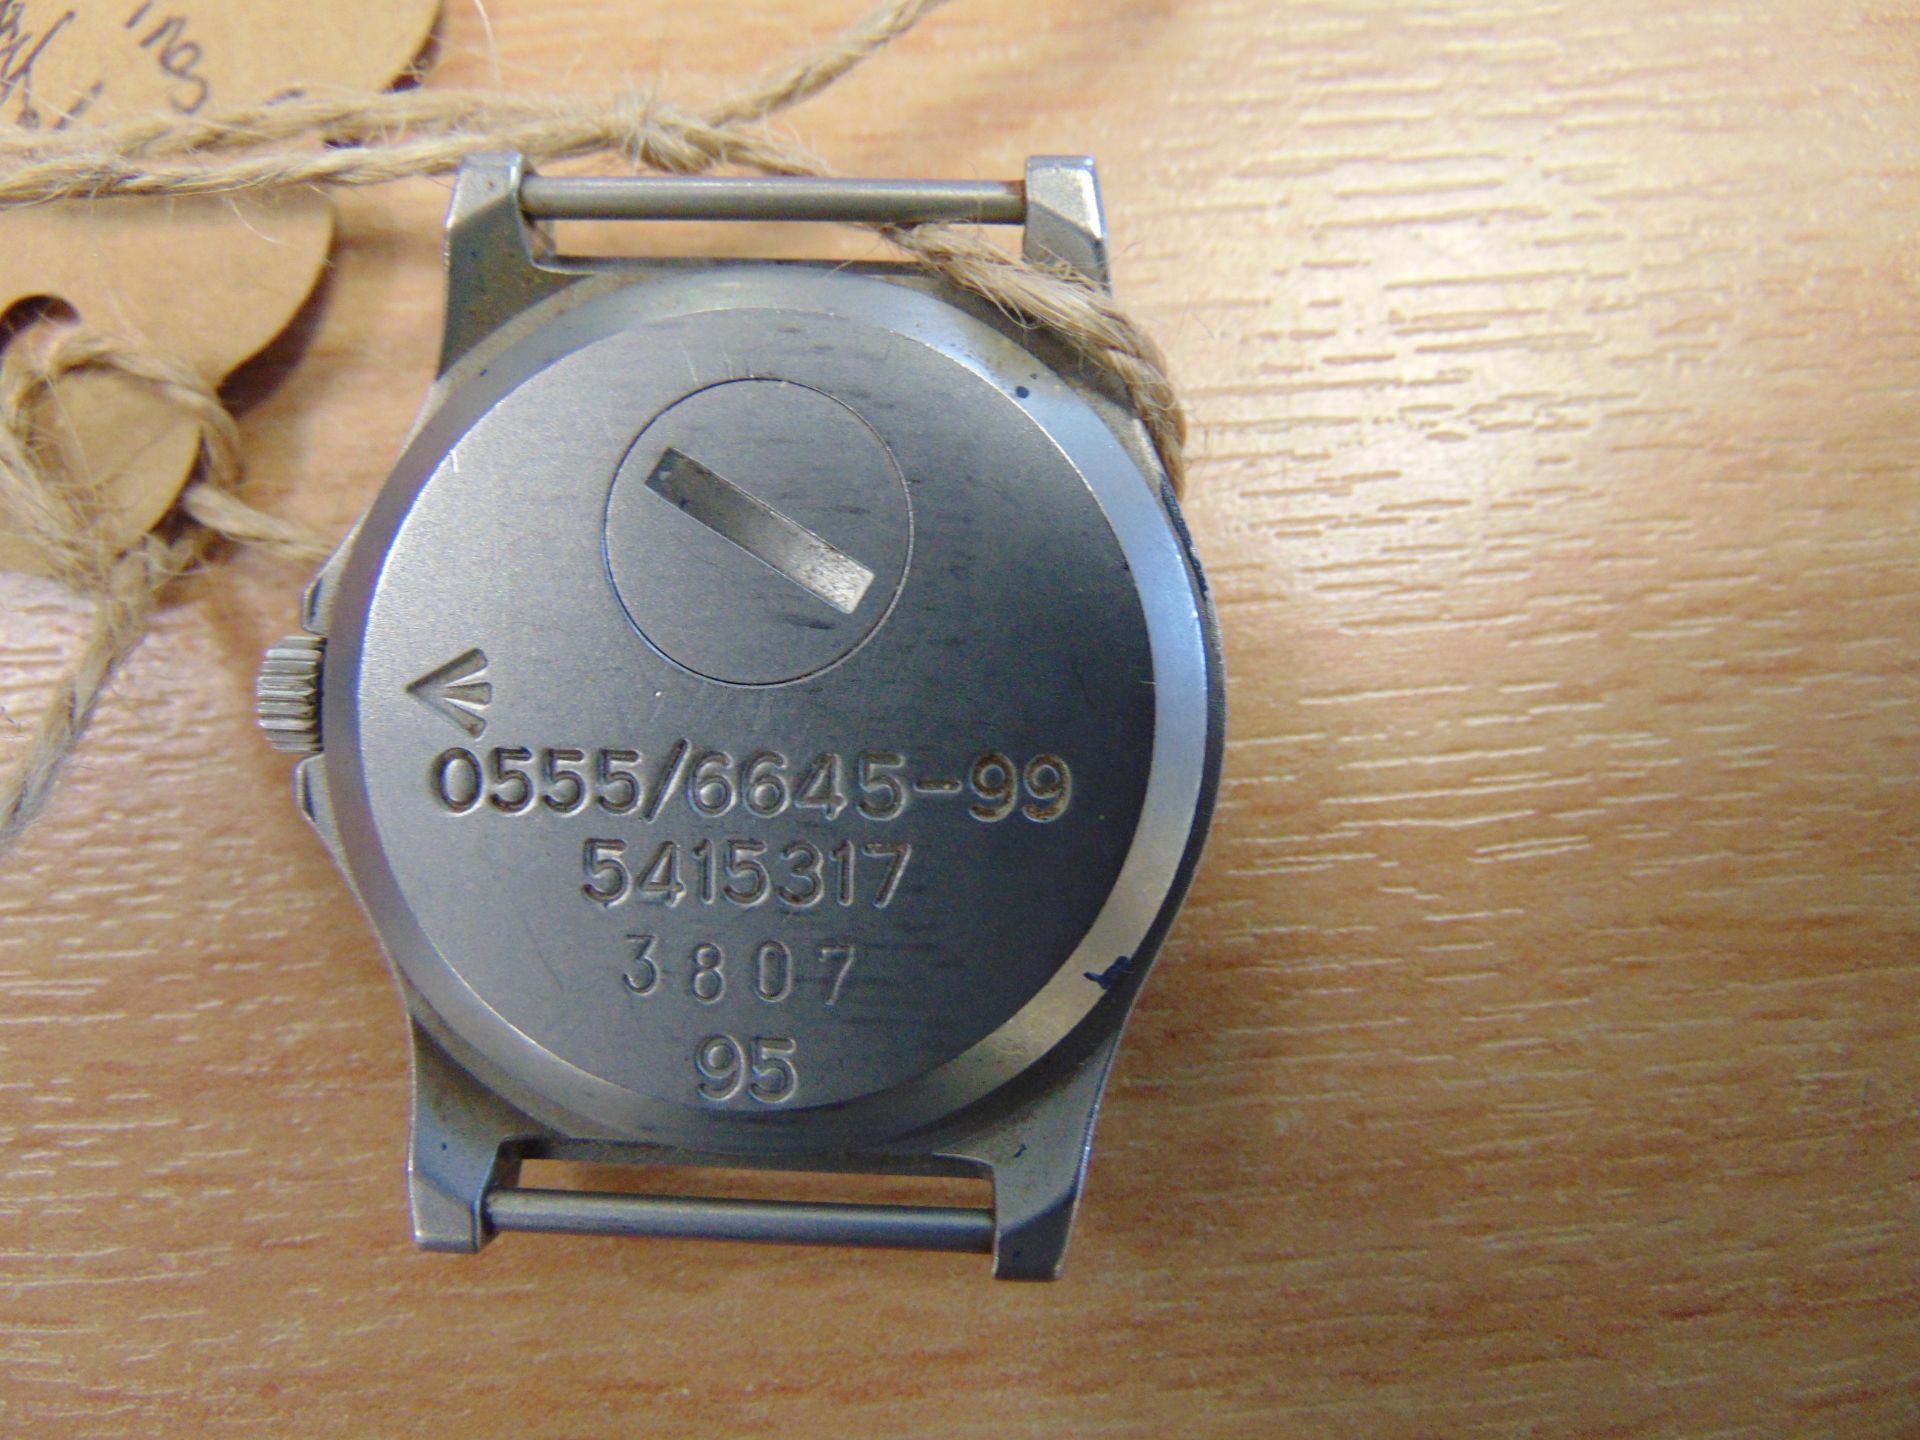 CWC (Cabot Watch Co Switzerland) 0555 Royal Marines / Navy Issue Service Watch Nato Marks - Image 3 of 4